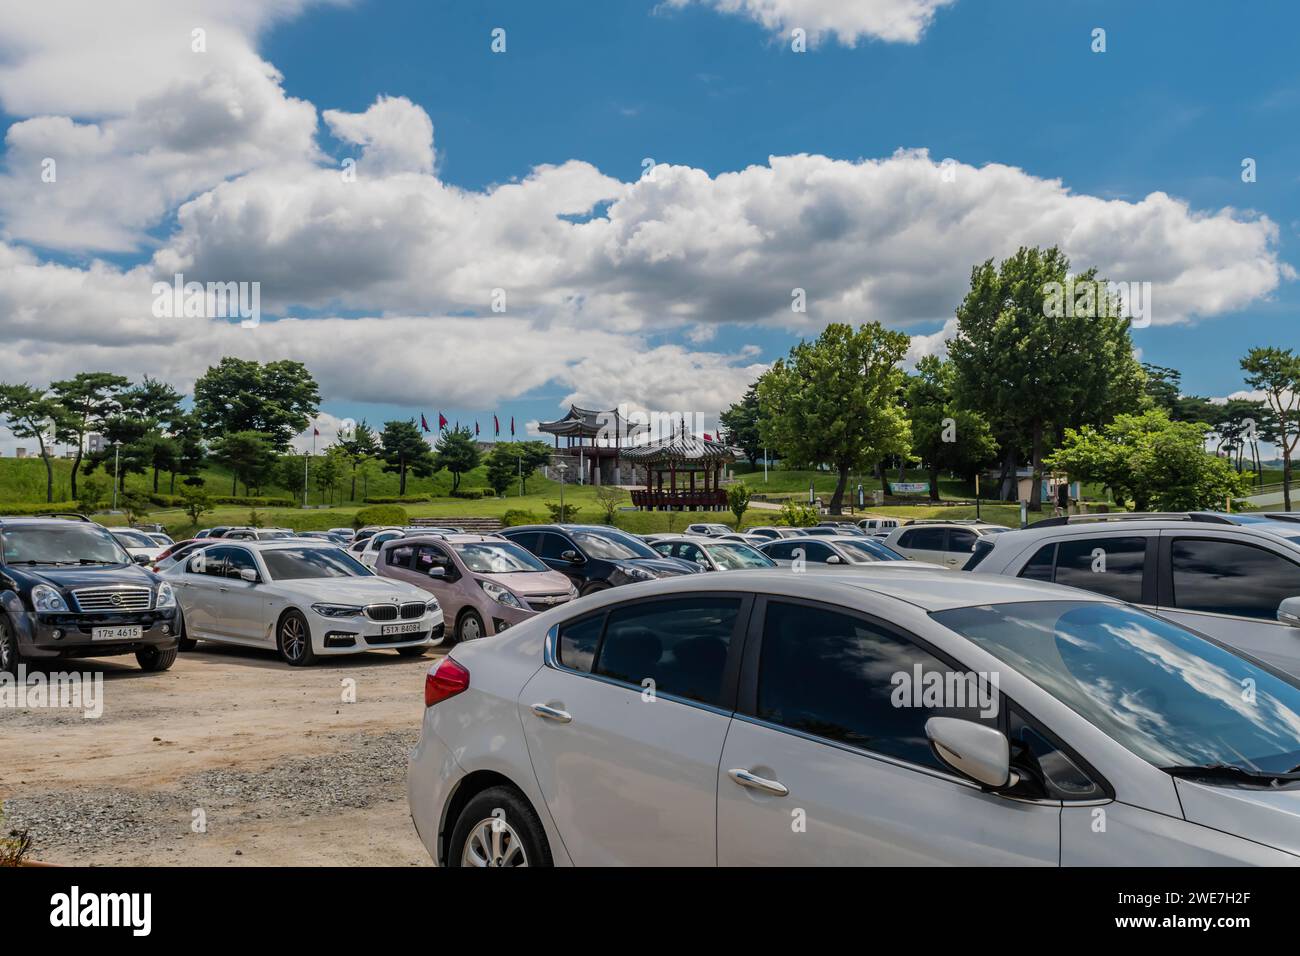 Cars in parking lot with main gate of Hongjueupseong walled town in distance under blue sky in South Korea Stock Photo